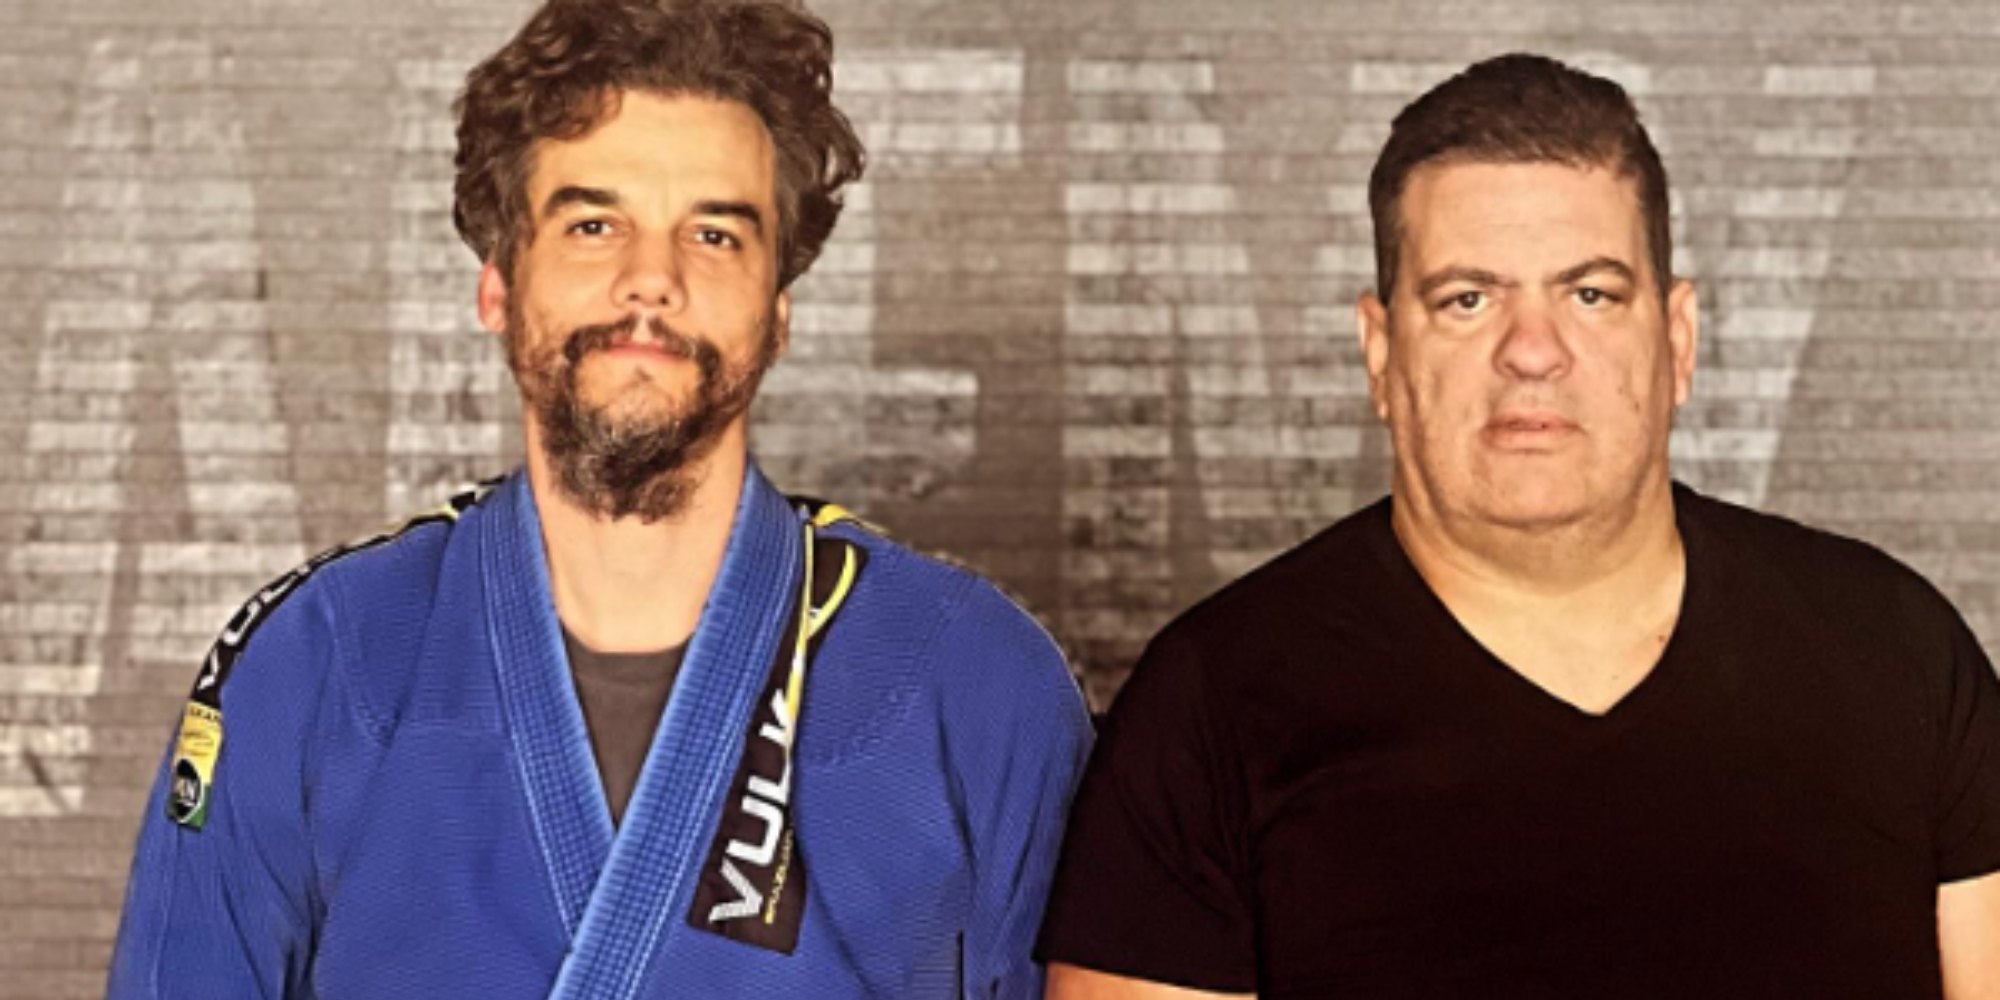 Narcos Star Wagner Moura Promoted to Brown Belt in BJJ